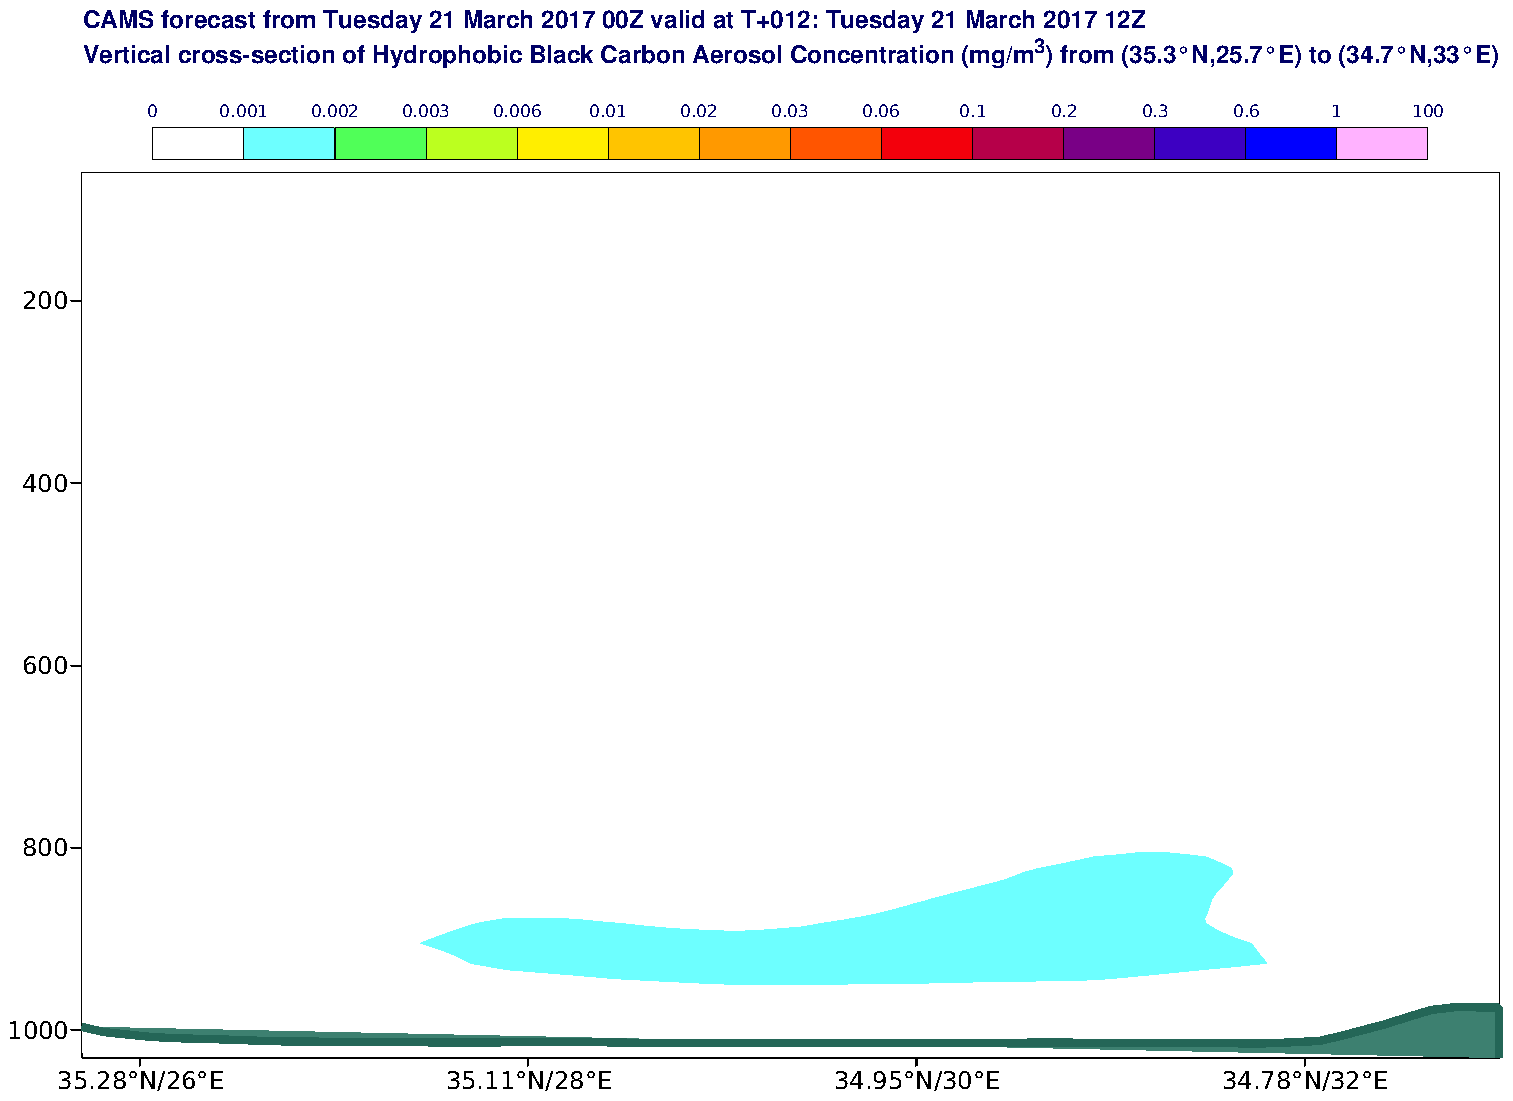 Vertical cross-section of Hydrophobic Black Carbon Aerosol Concentration (mg/m3) valid at T12 - 2017-03-21 12:00